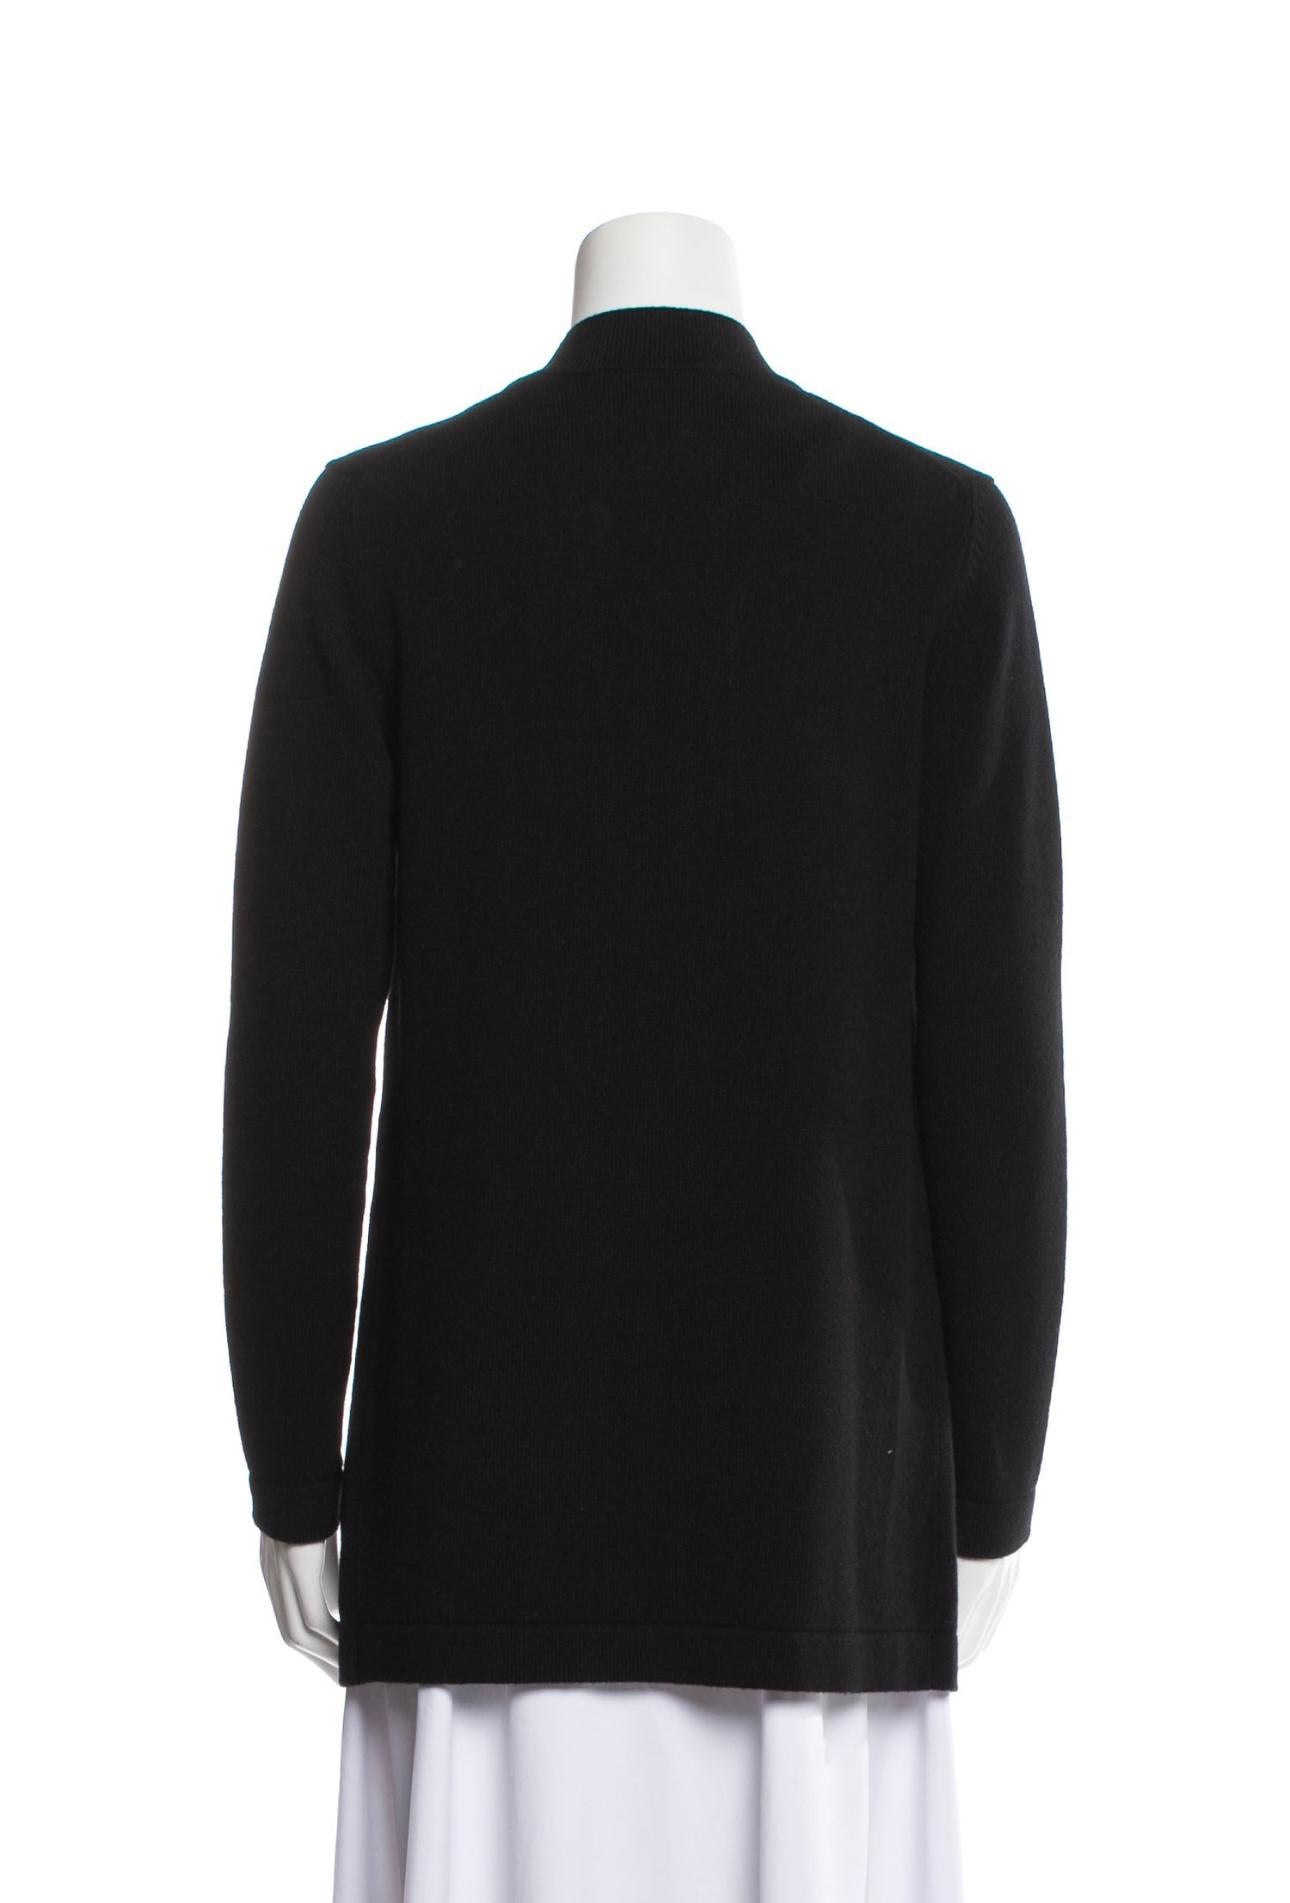 Chanel 2022 Spring New CC Buttons Black Cashmere Cardigan For Sale 3